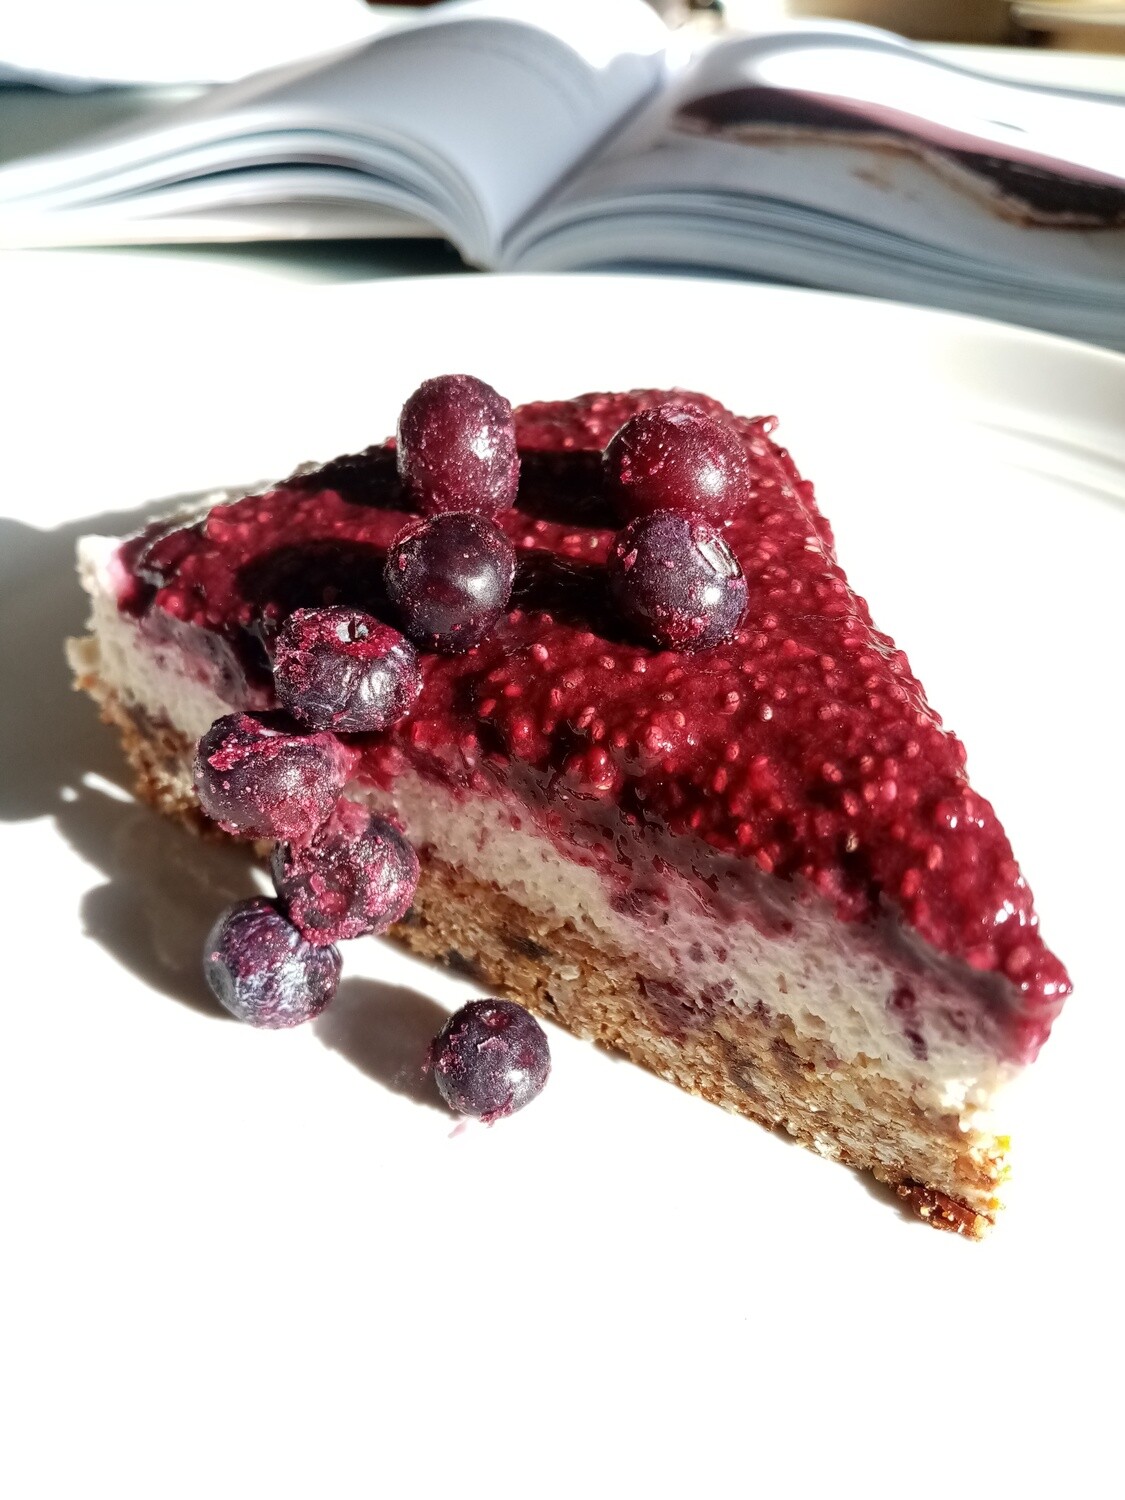 BERRY AND GRANOLA CHEESECAKE. Vegan wanne be cheesecake with Berry chia coulis and a baked nutty, oaty base. Keep chilled. Refined sugar free.